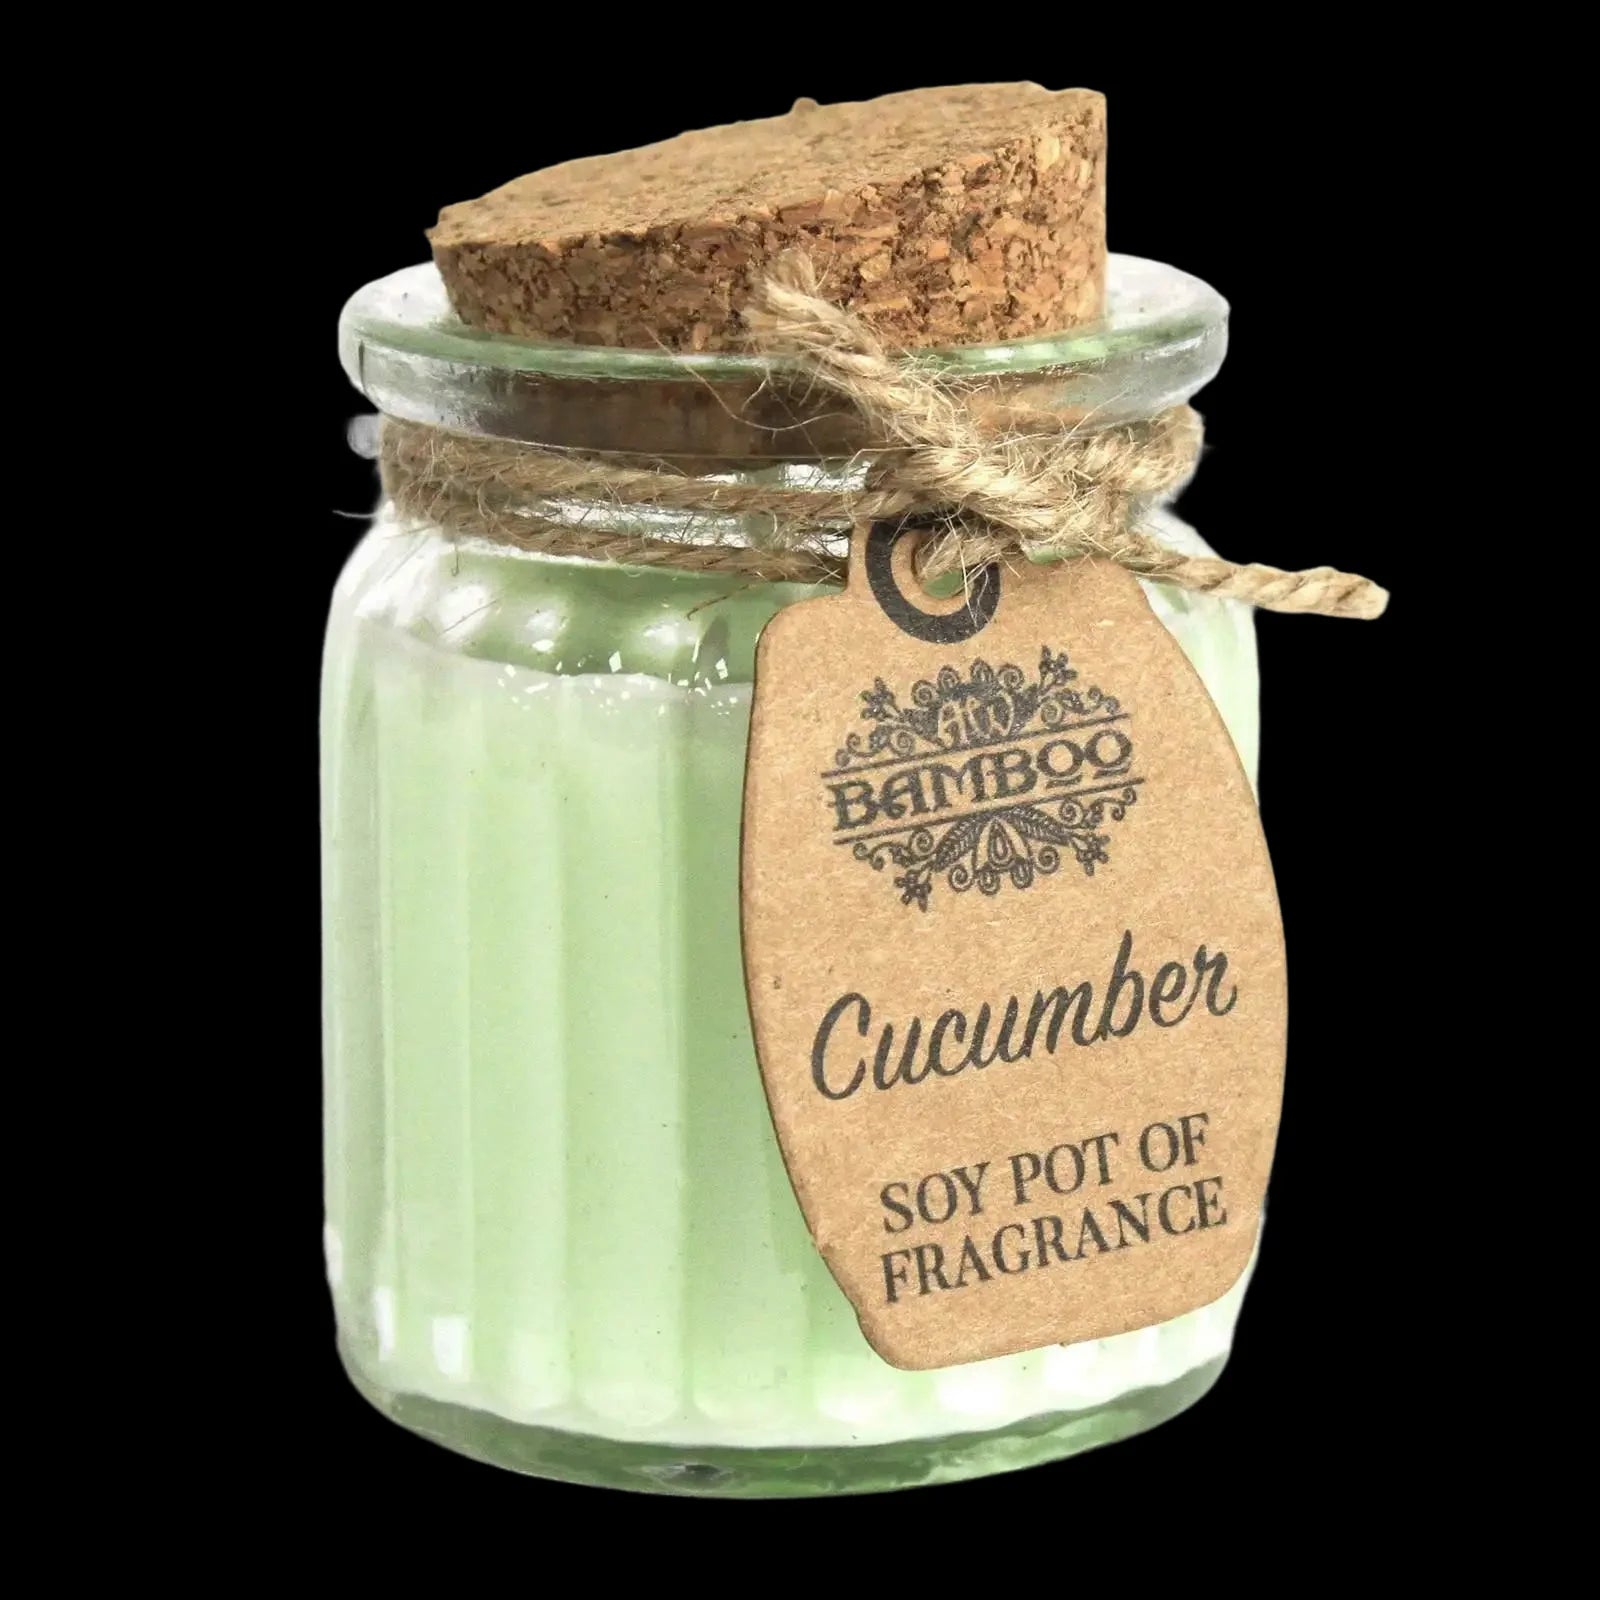 Cucumber Soy Pot Of Fragrance Candles - Ancient Wisdom - 1